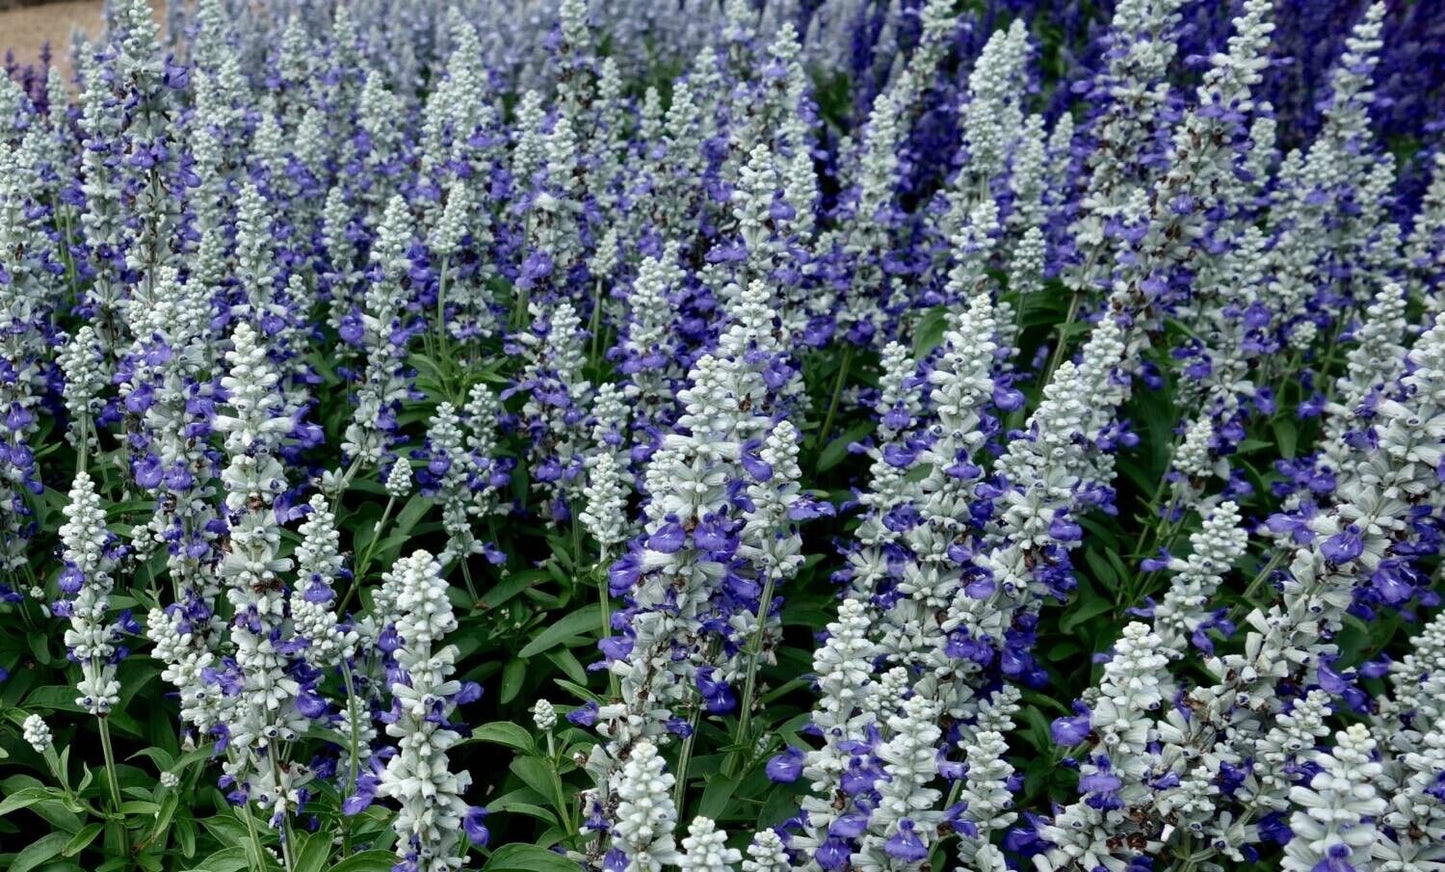 50 Cathedral Bluw Salvia Seeds Flower Seed Perennial Flowers 964 US SELLER Bee